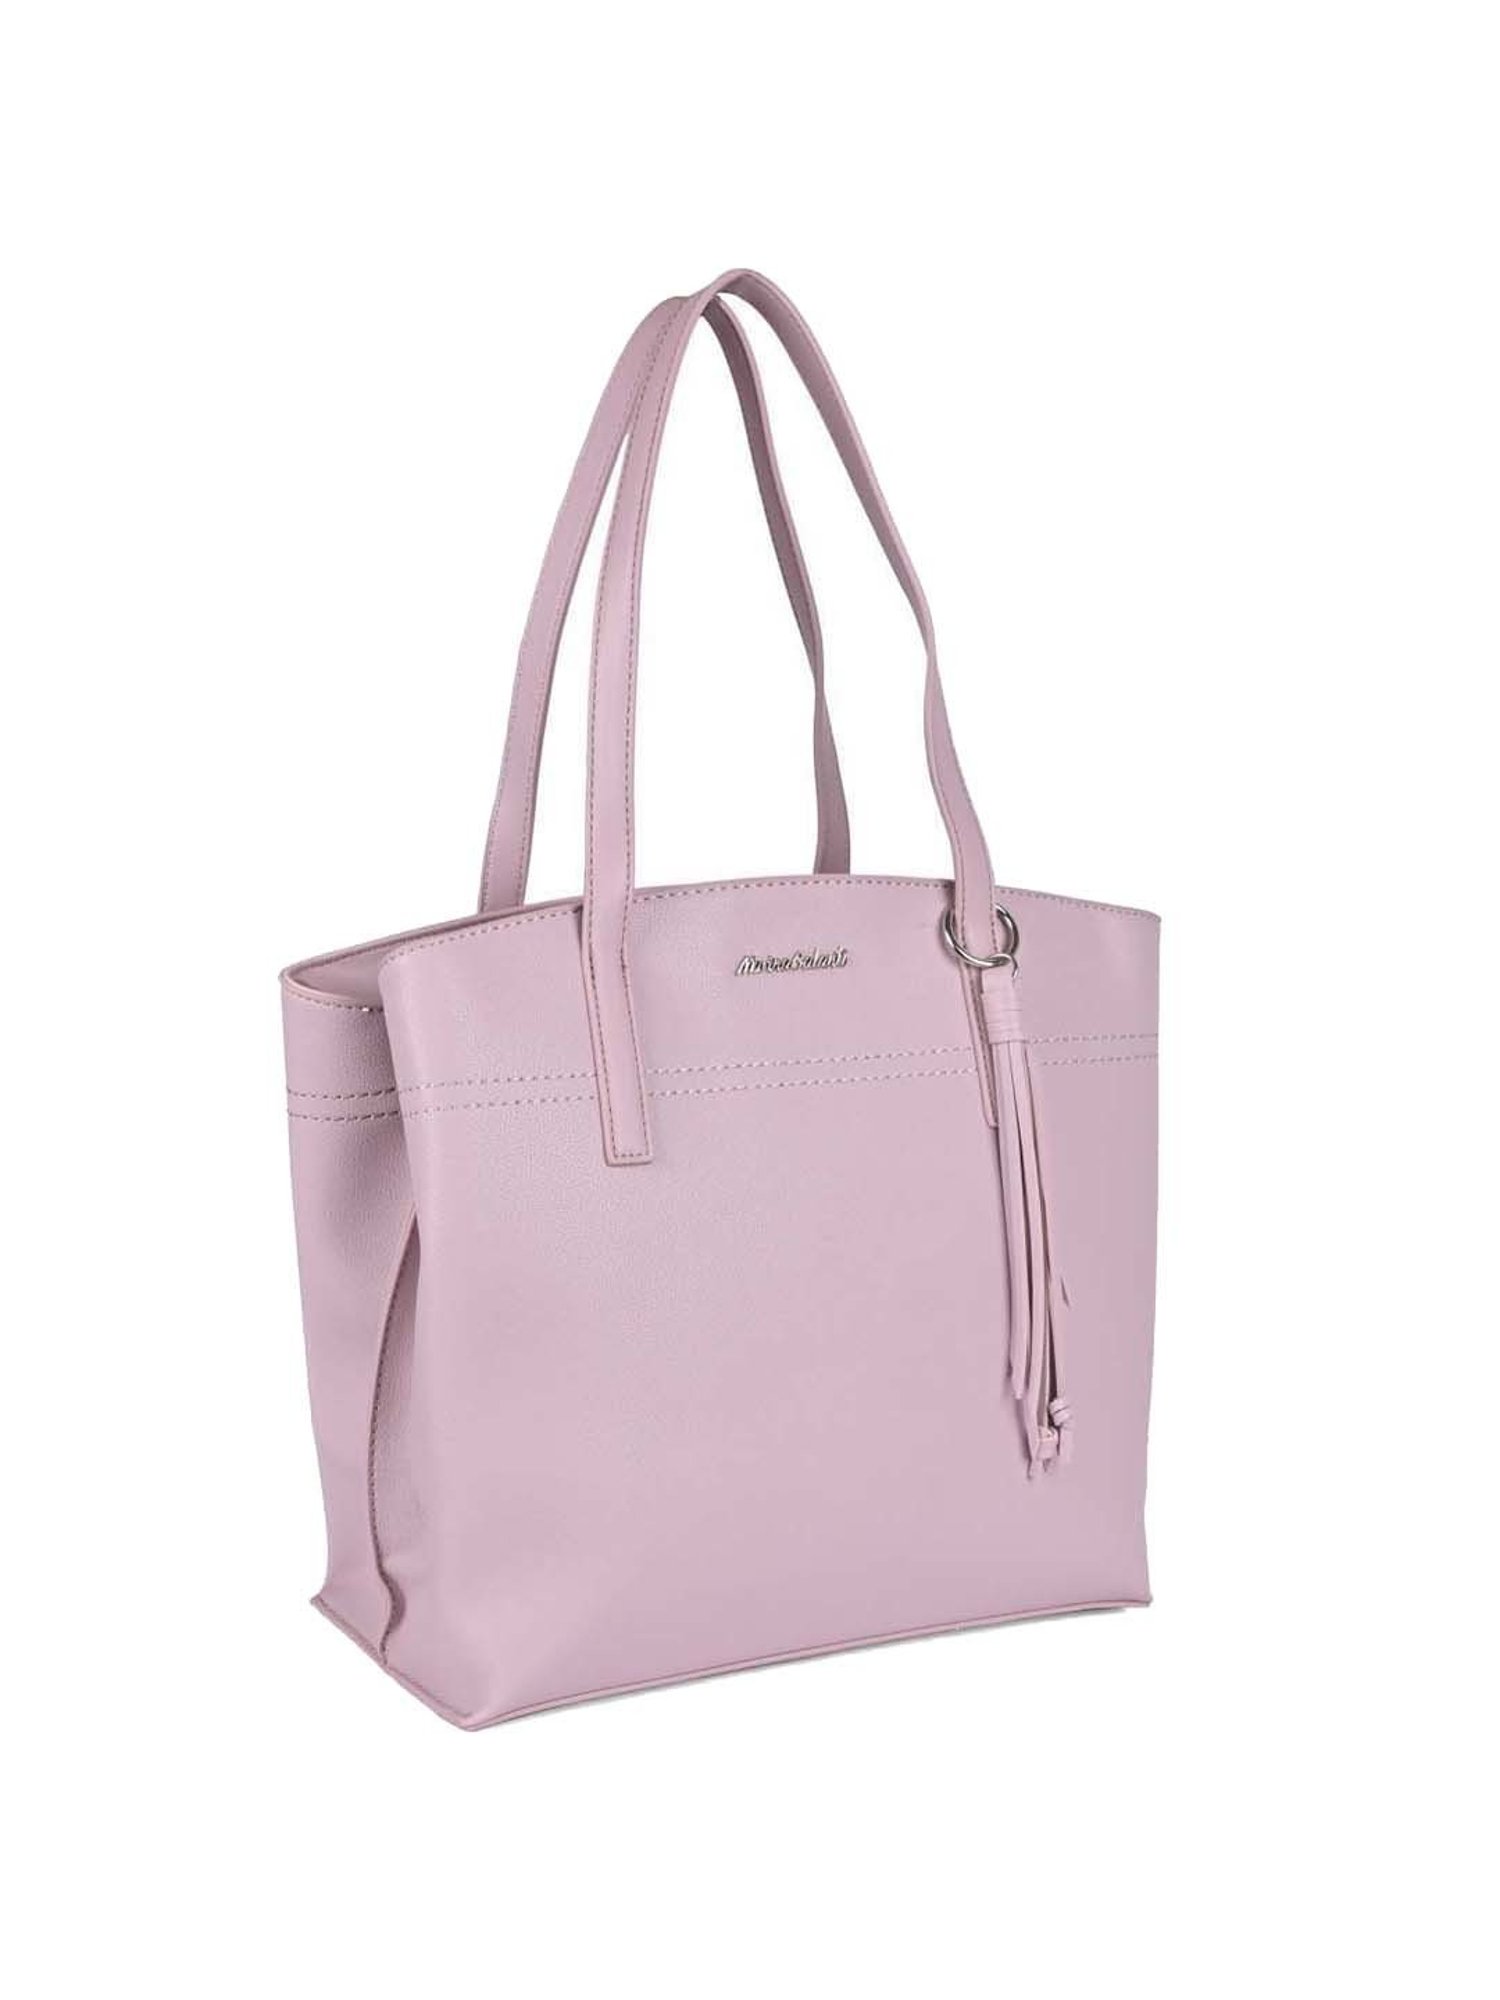 Calvin Klein Pink Leather Mercy Satchel Bag – COUTUREPOINT